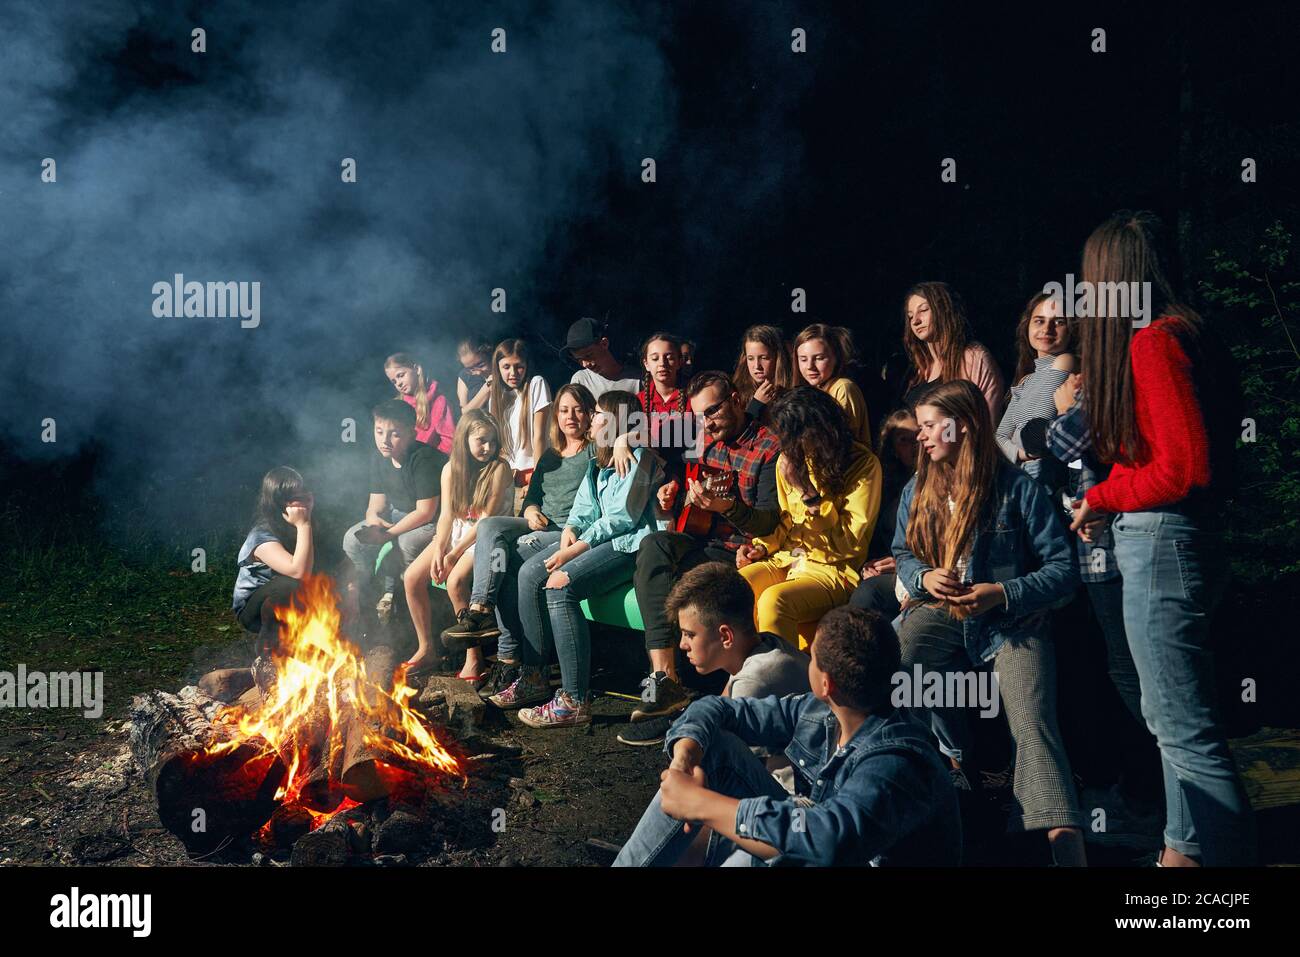 Side view of happy kids sitting on wooden bench and singing near camp fire in warm summer night. Scoutmasters playing guitar and having fun with children in forest. Concept of summer camping. Stock Photo